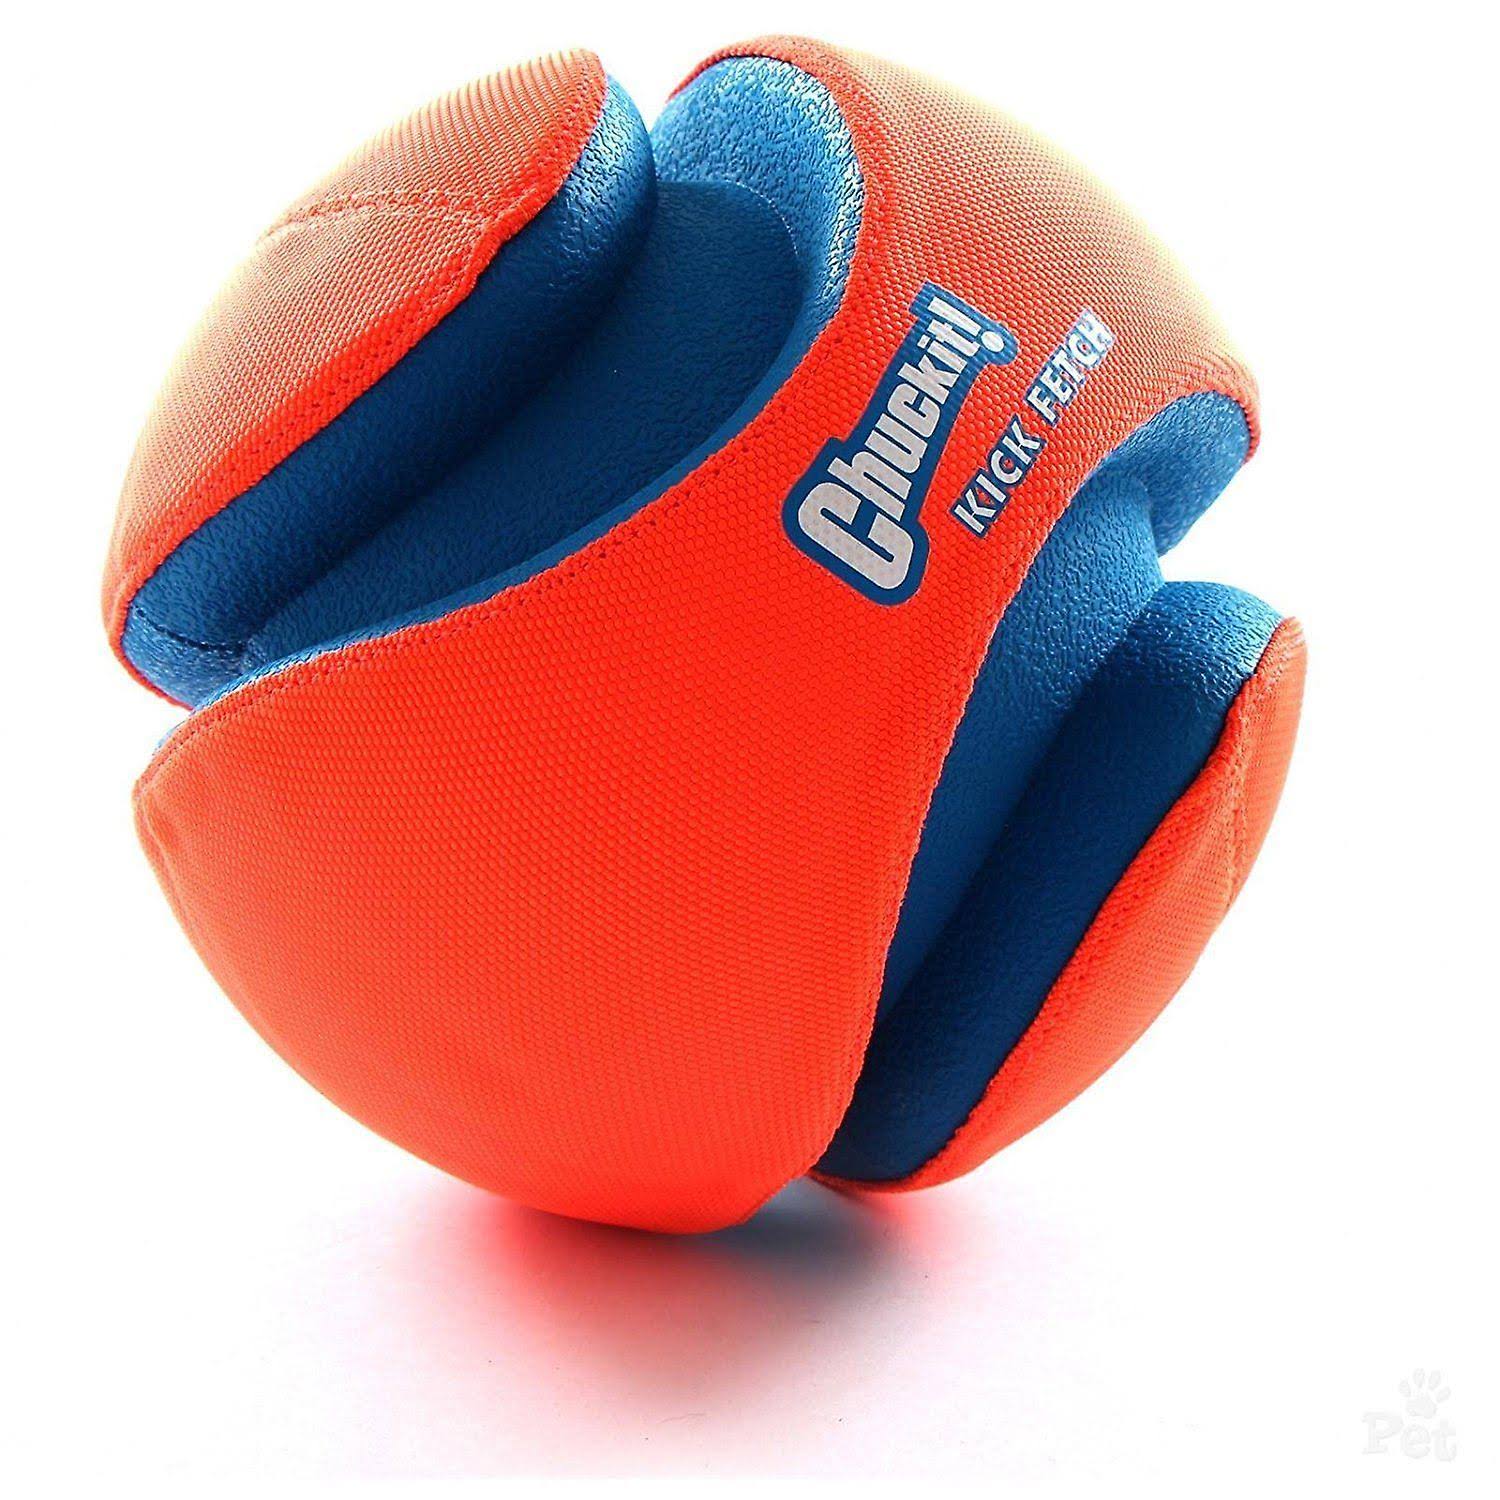 Chuckit Kick Fetch Ball Large Durable Floating Dog Toy - 20cm